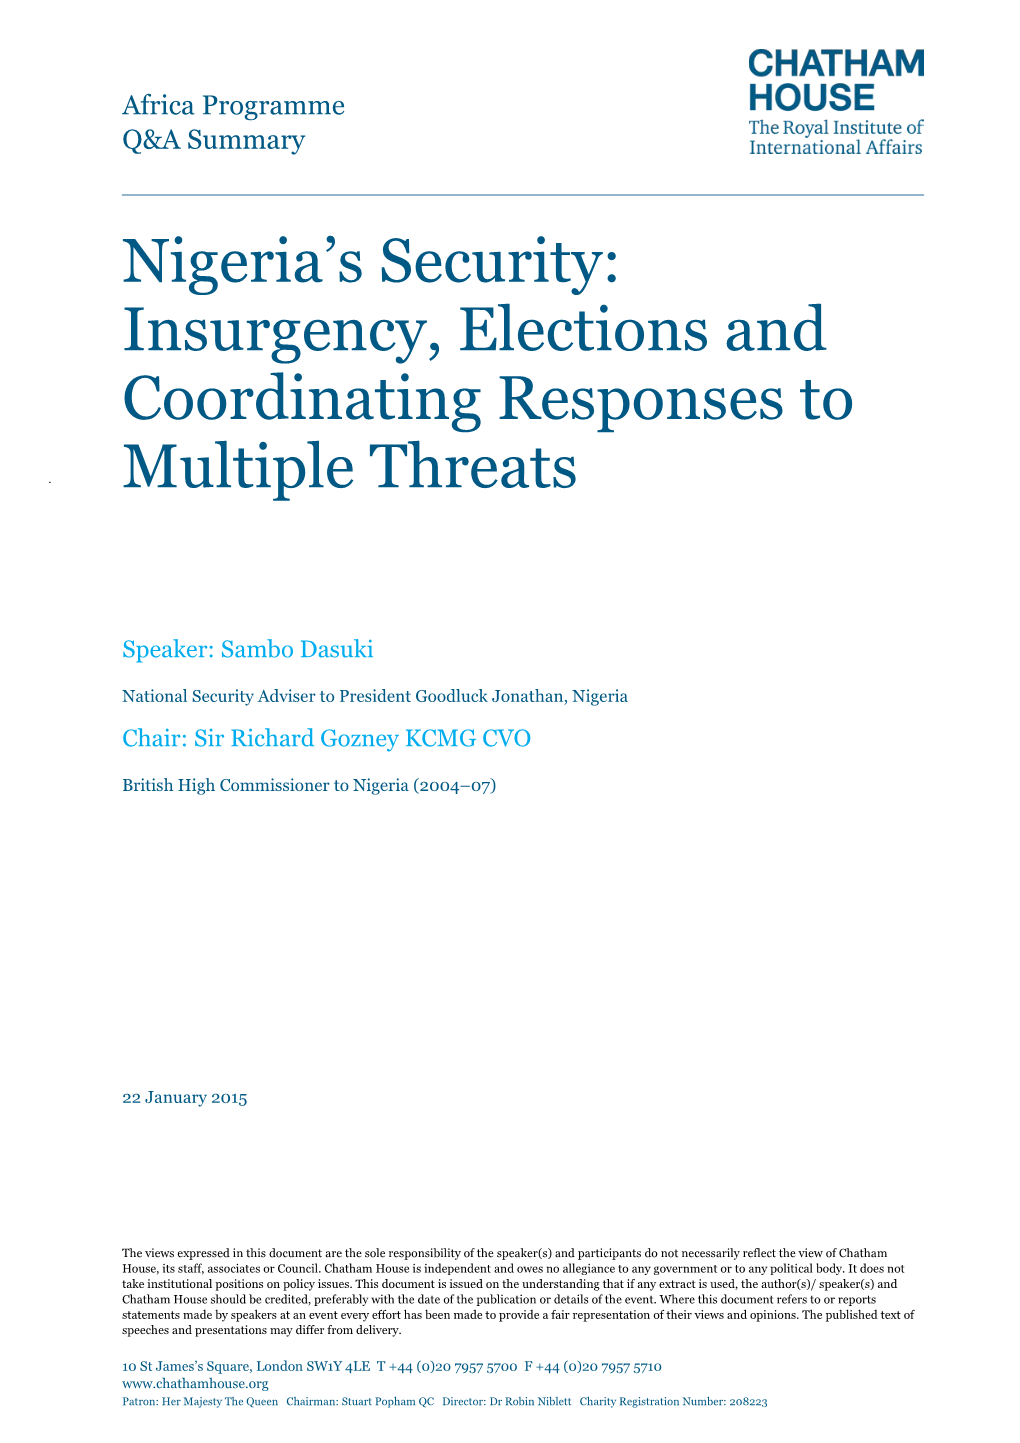 Nigeria's Security: Insurgency, Elections and Coordinating